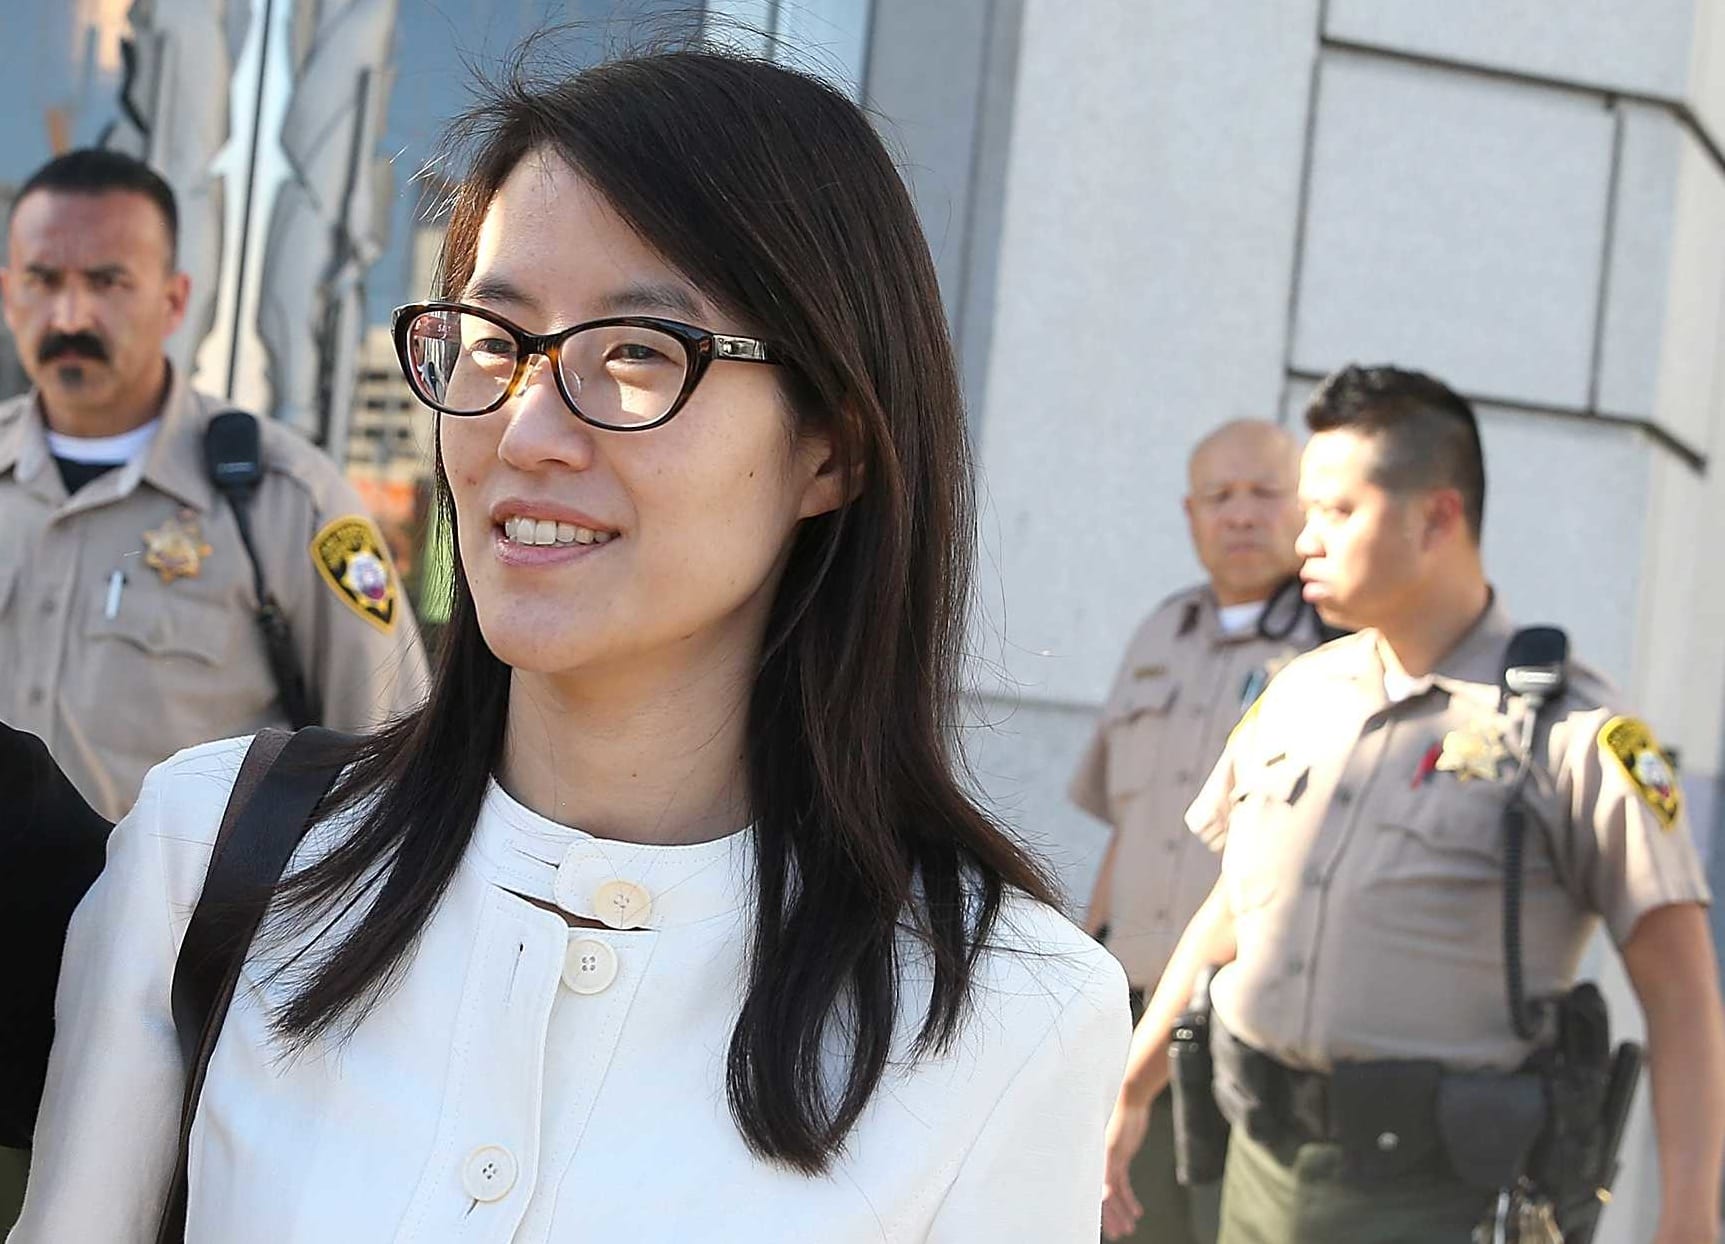 Ellen Pao (R) leaves the San Francisco Superior Court Civic Center Courthouse with her attorney Therese Lawless on March 27, 2015. A jury found no gender bias against her.